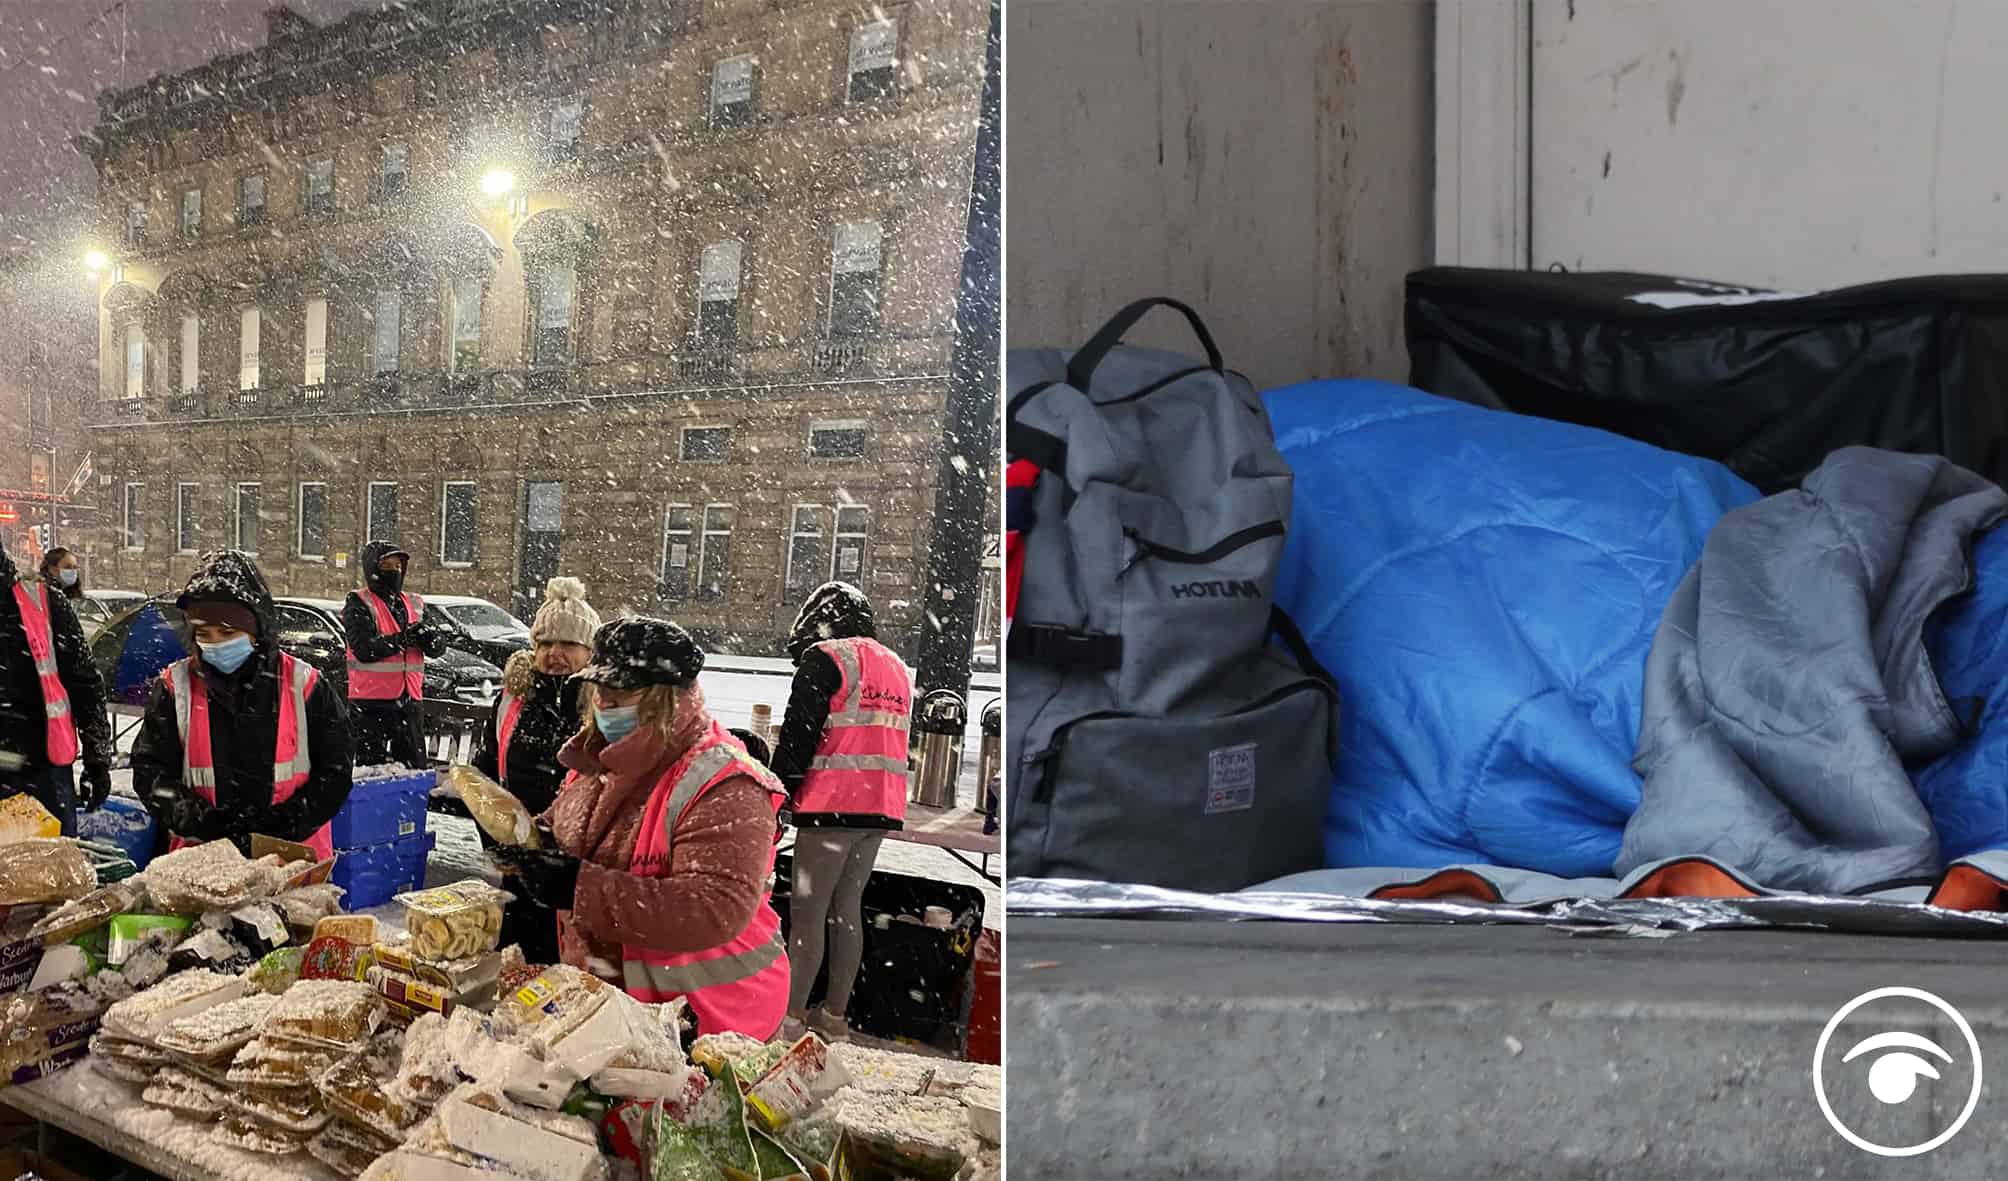 As temperatures plunged to minus 23C human kindness key to helping homeless